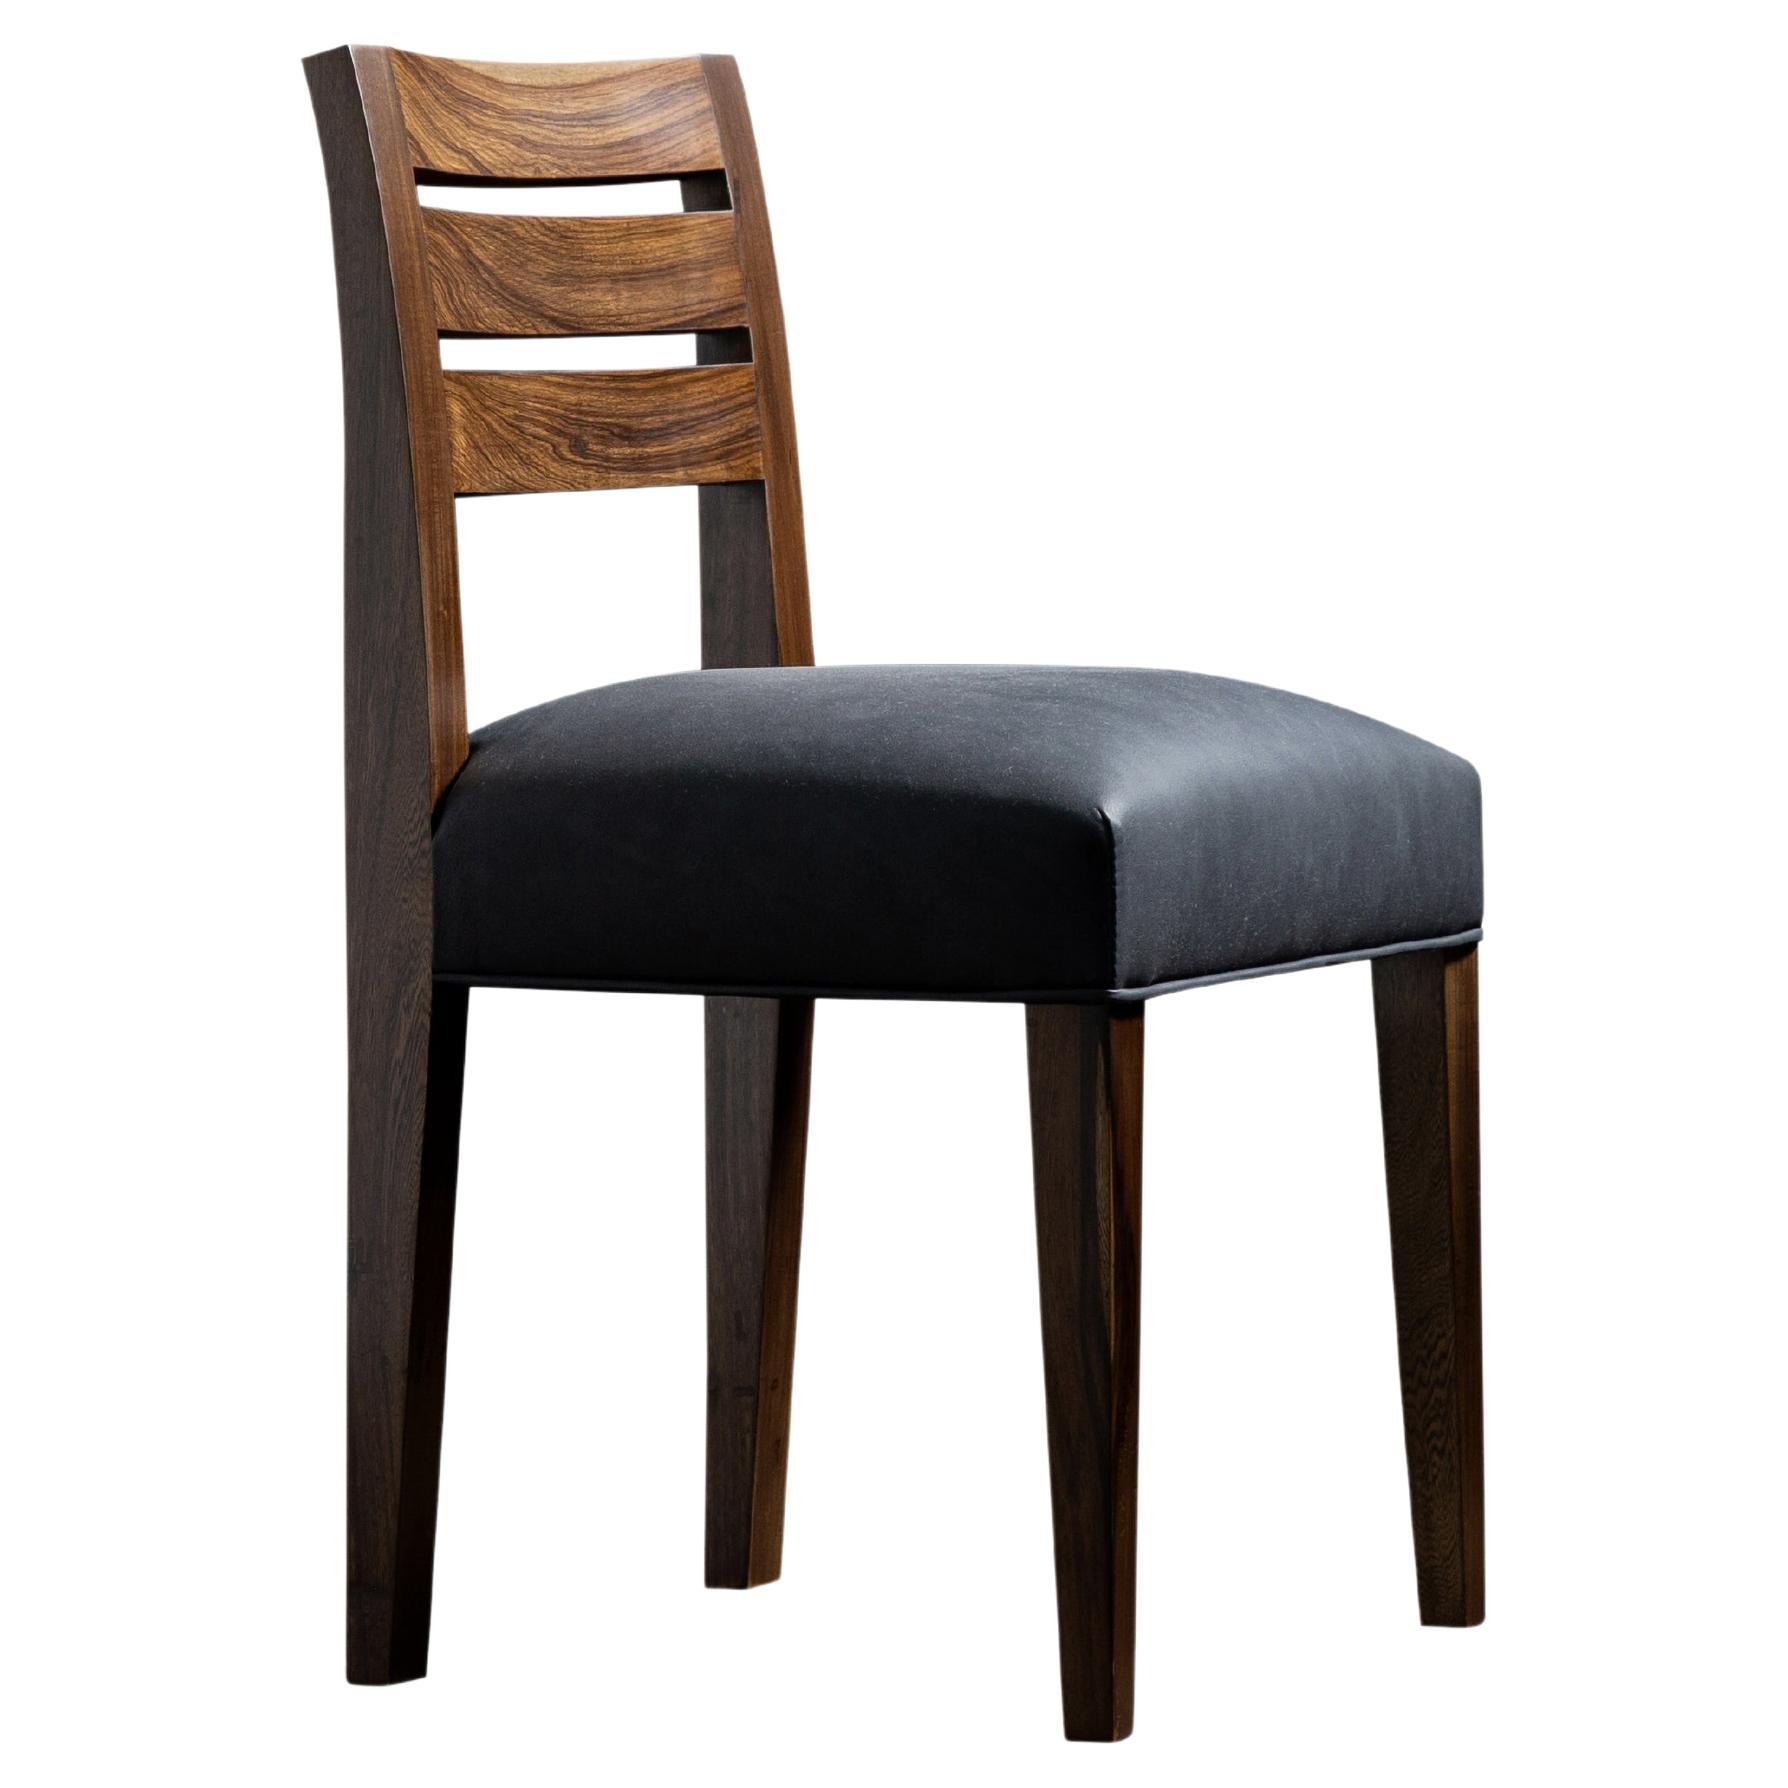 Contemporary Argentine Rosewood and Leather Side Chair von Costantini, Renzo im Angebot